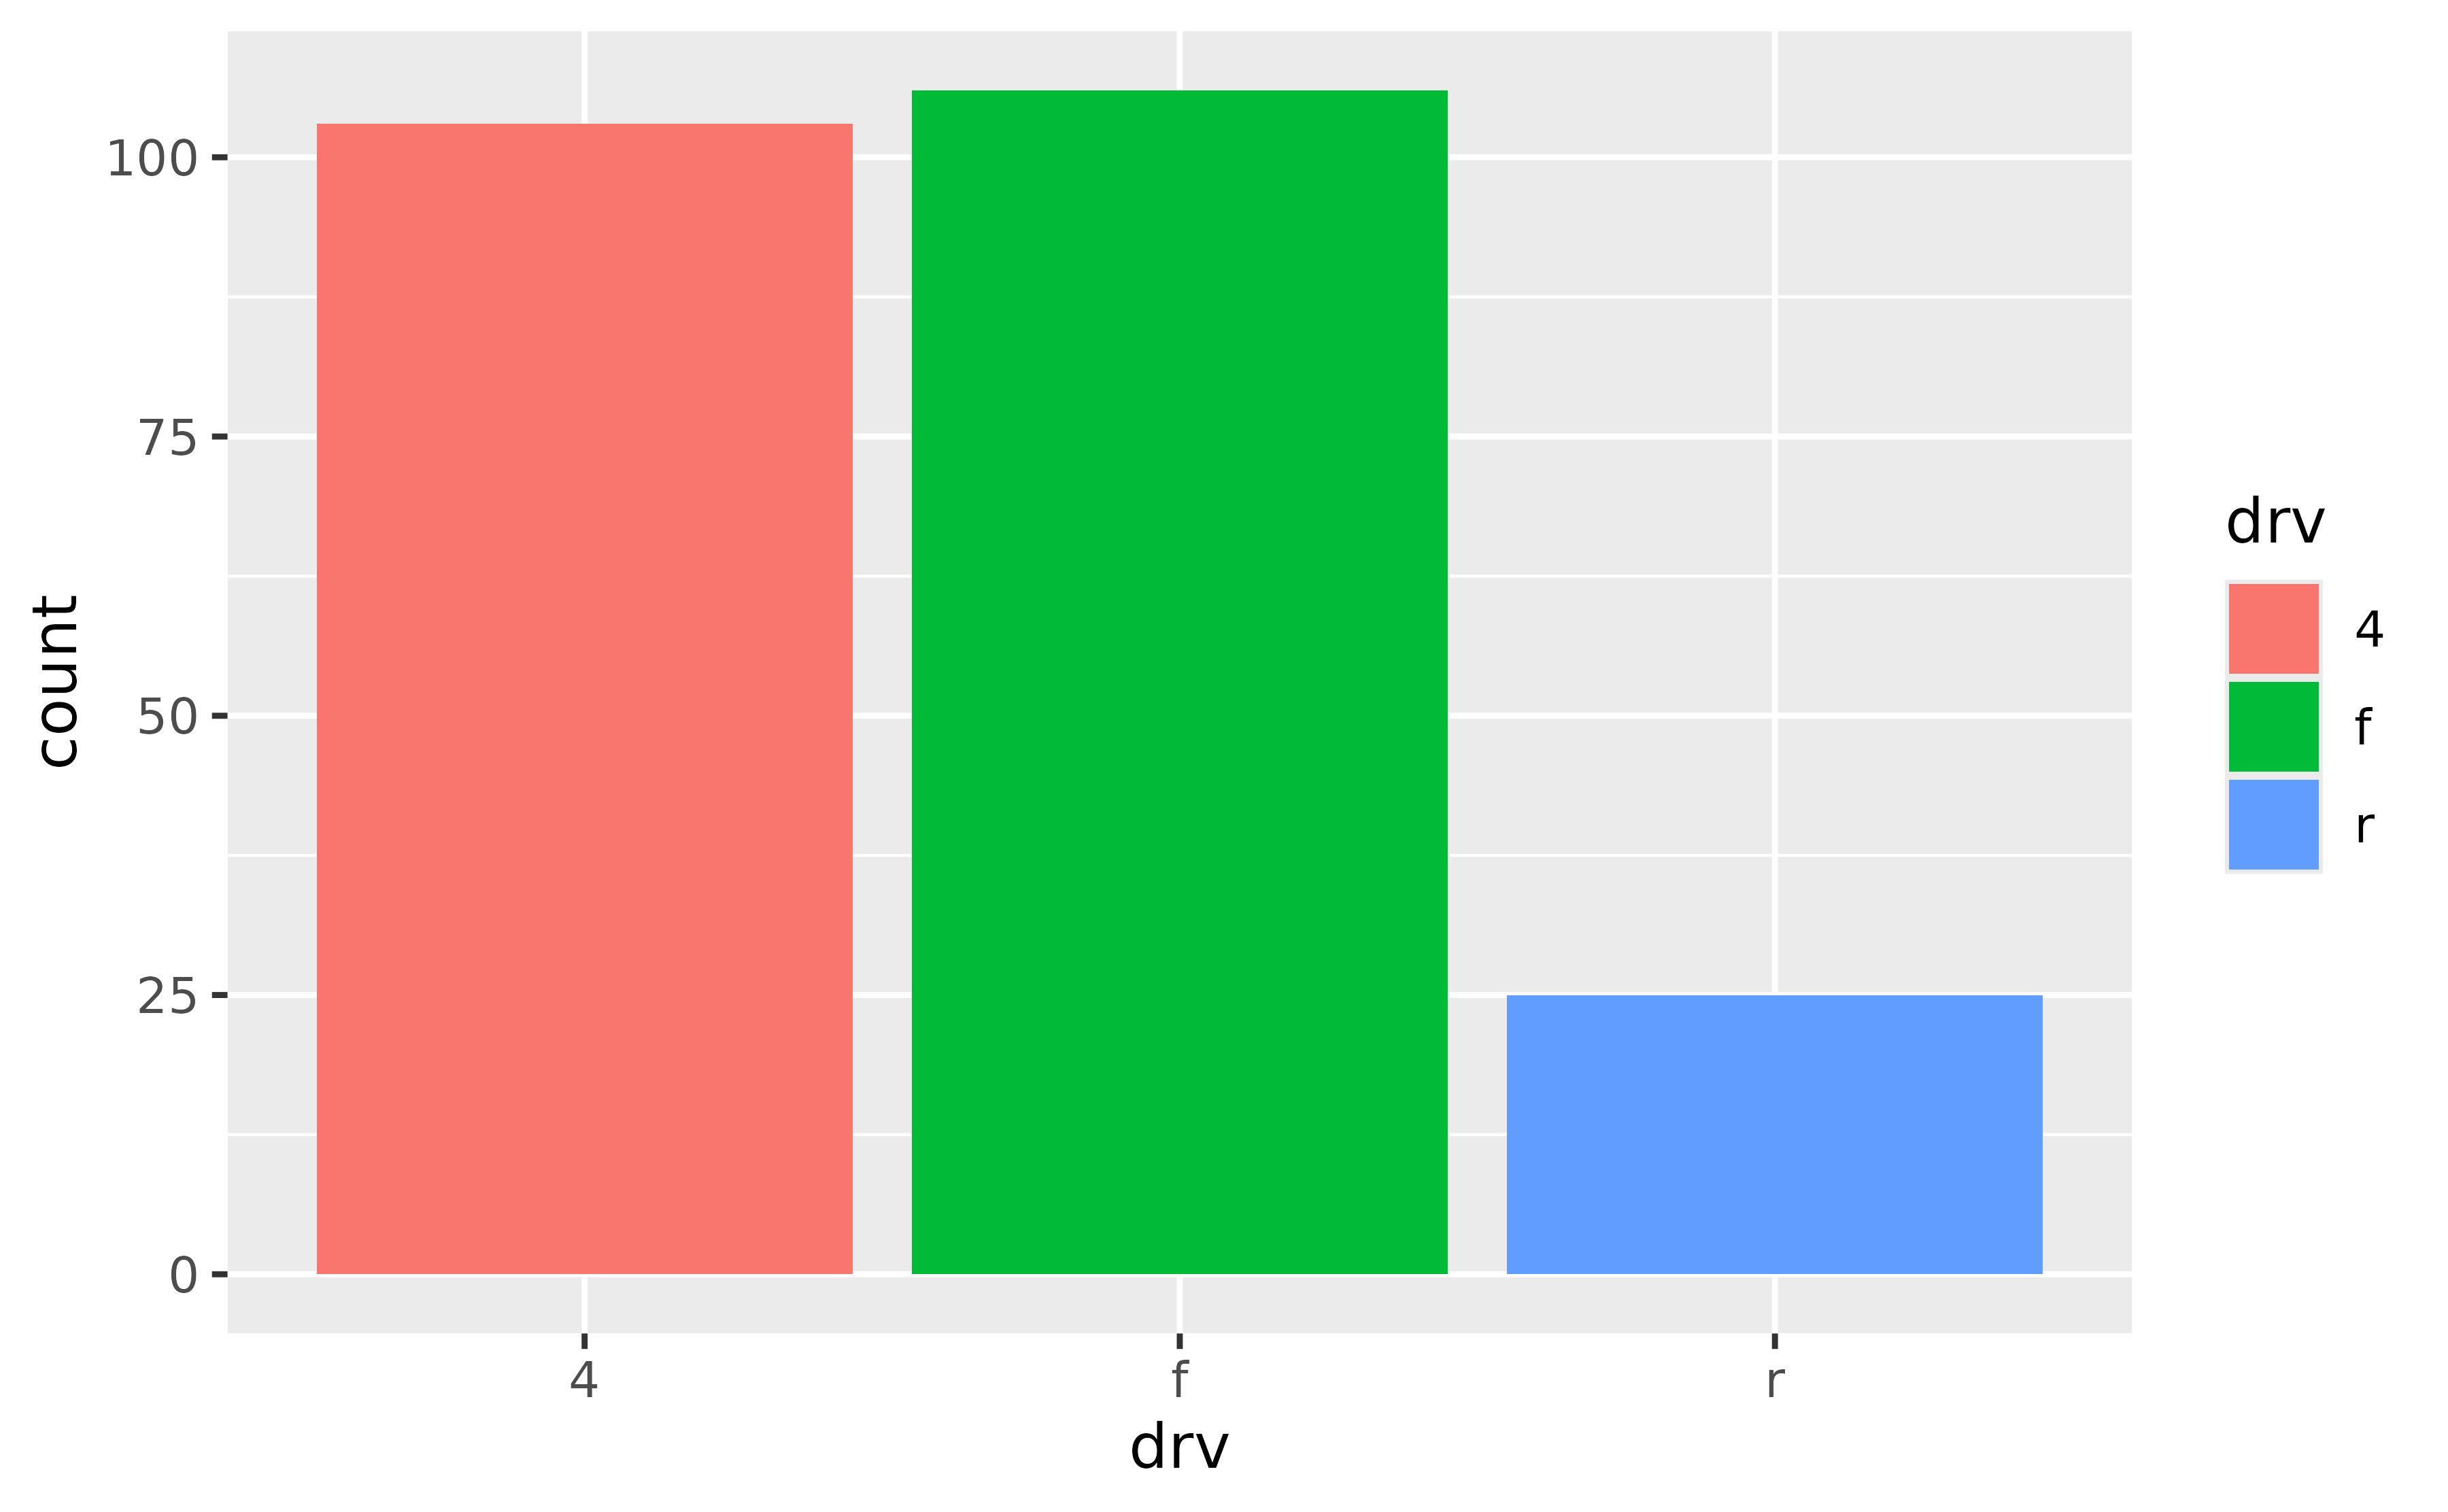 A bar chart showing the number of cars for each of three types of drive train. From left-to-right, the bars appear red, green and blue.